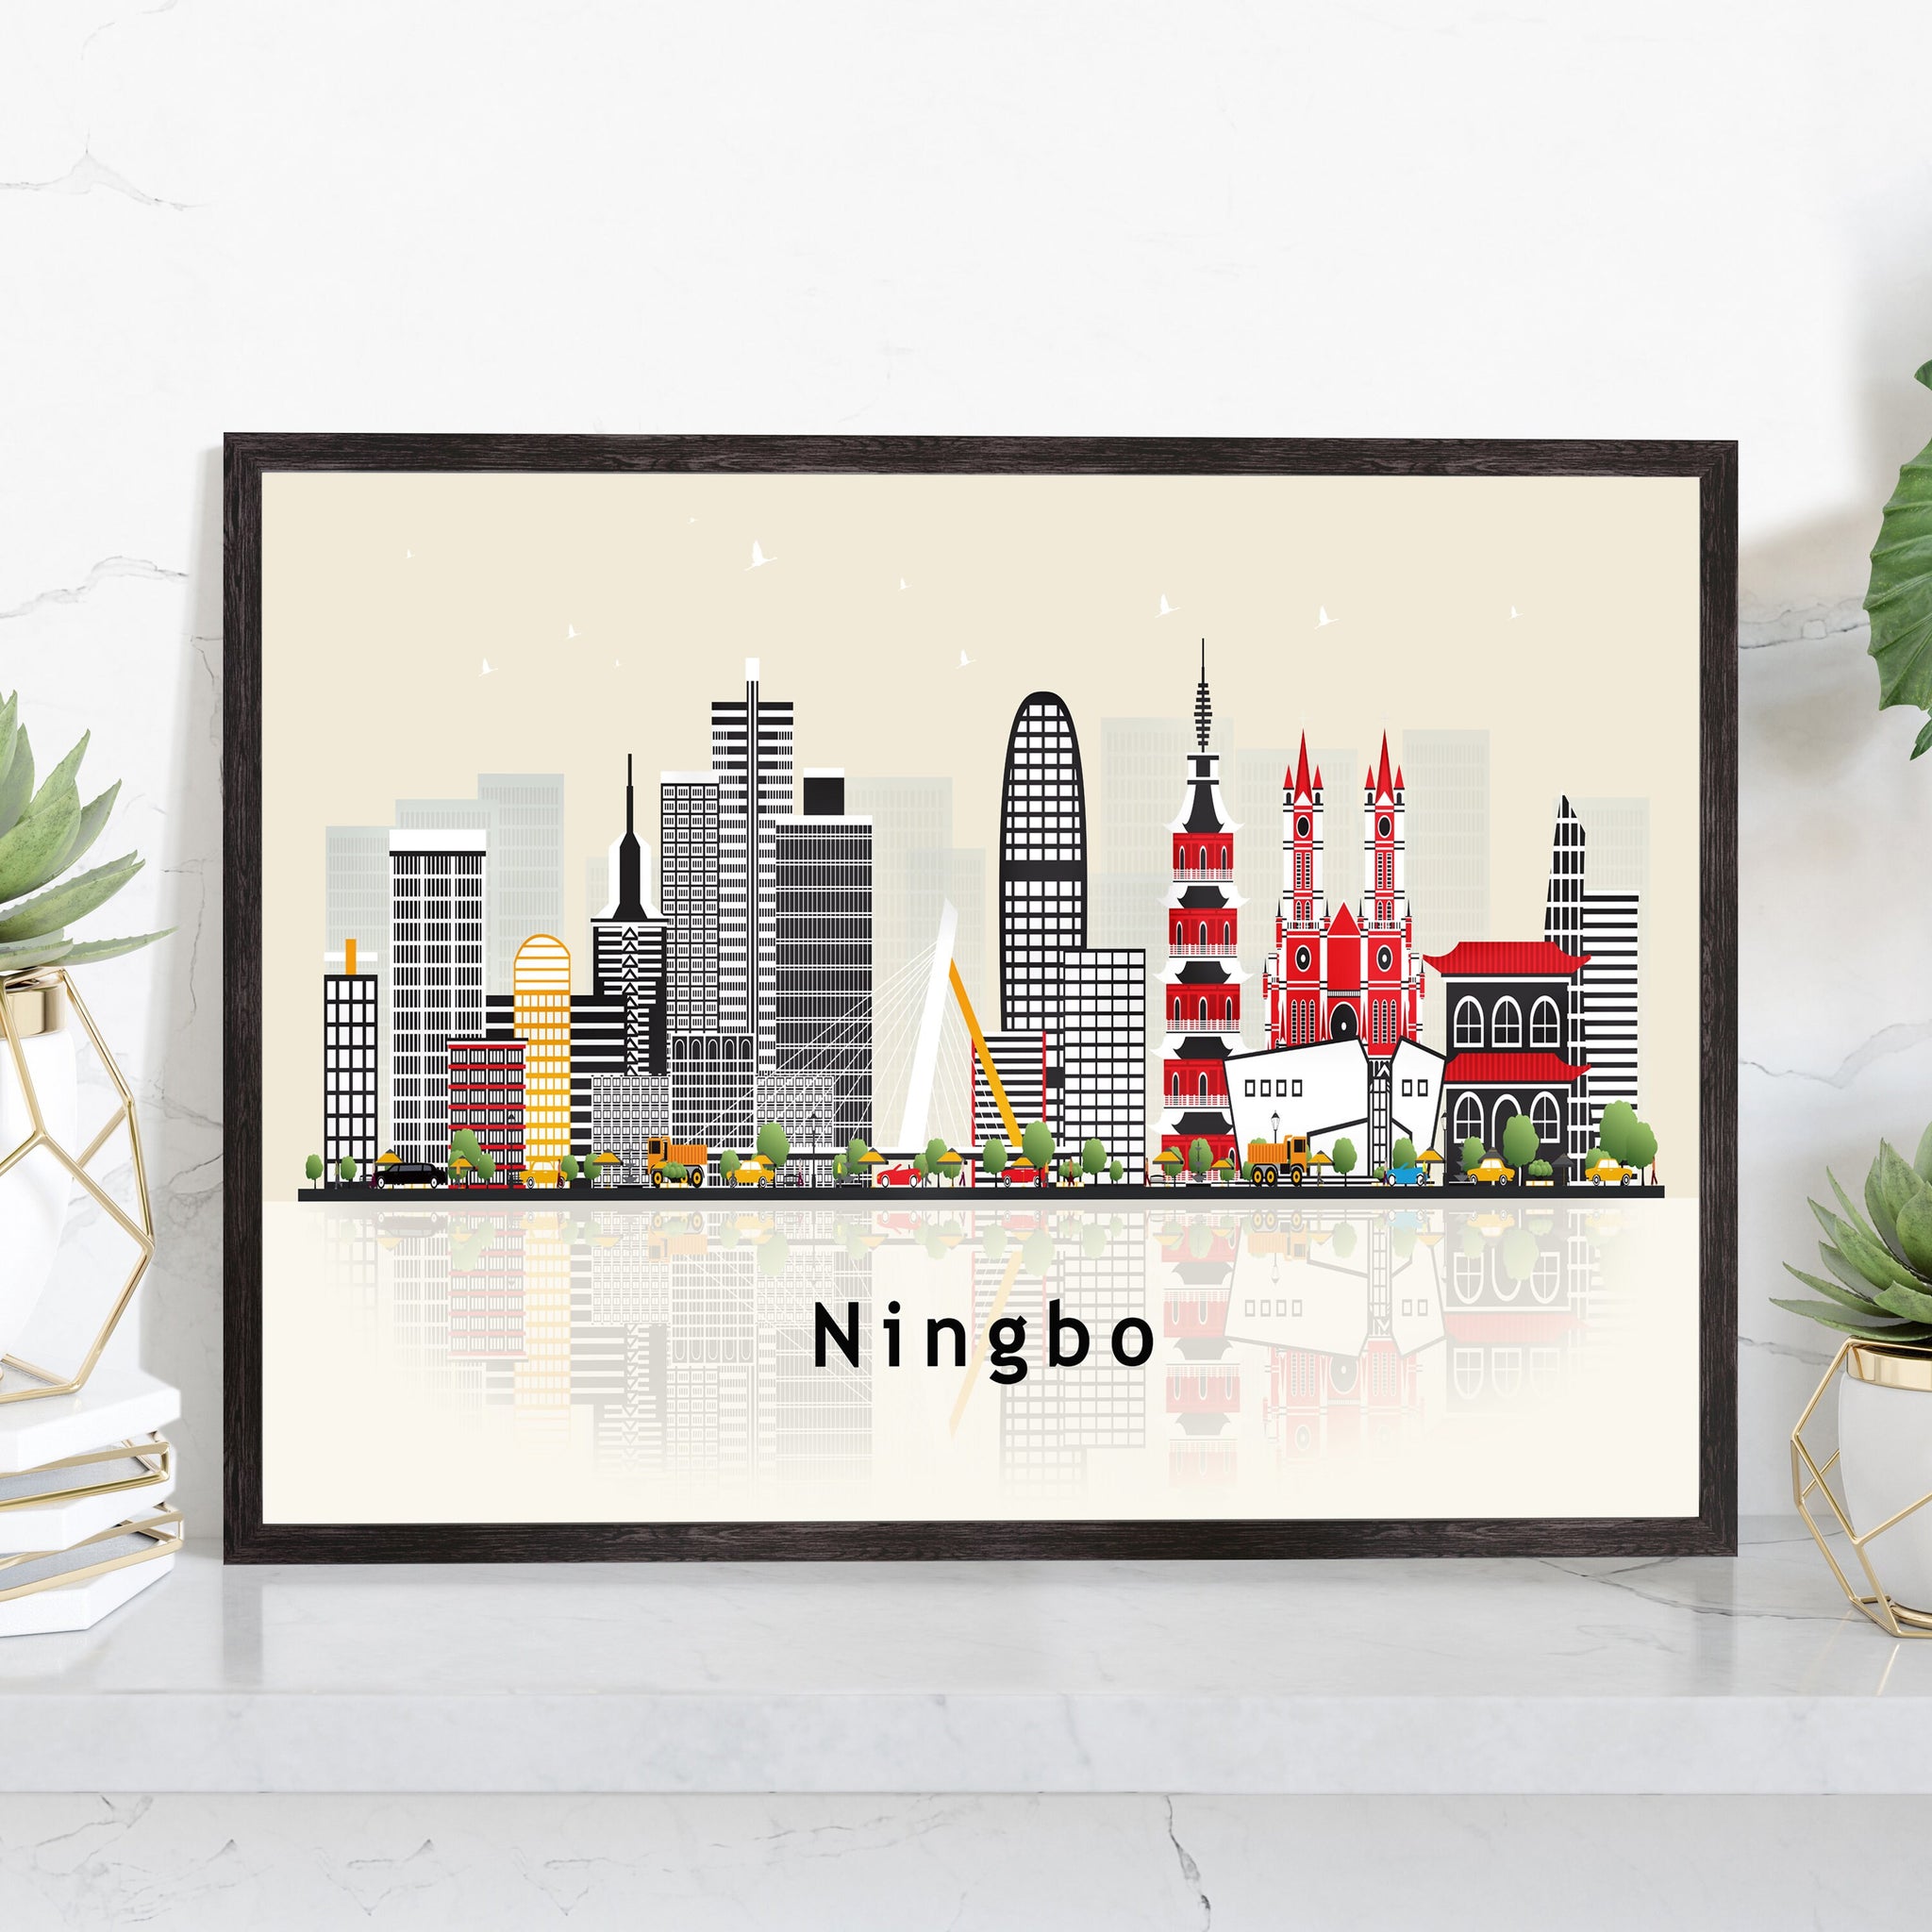 NINGBO CHINA Illustration skyline poster, Modern skyline cityscape poster, China city skyline landmark map poster, Home wall decoration